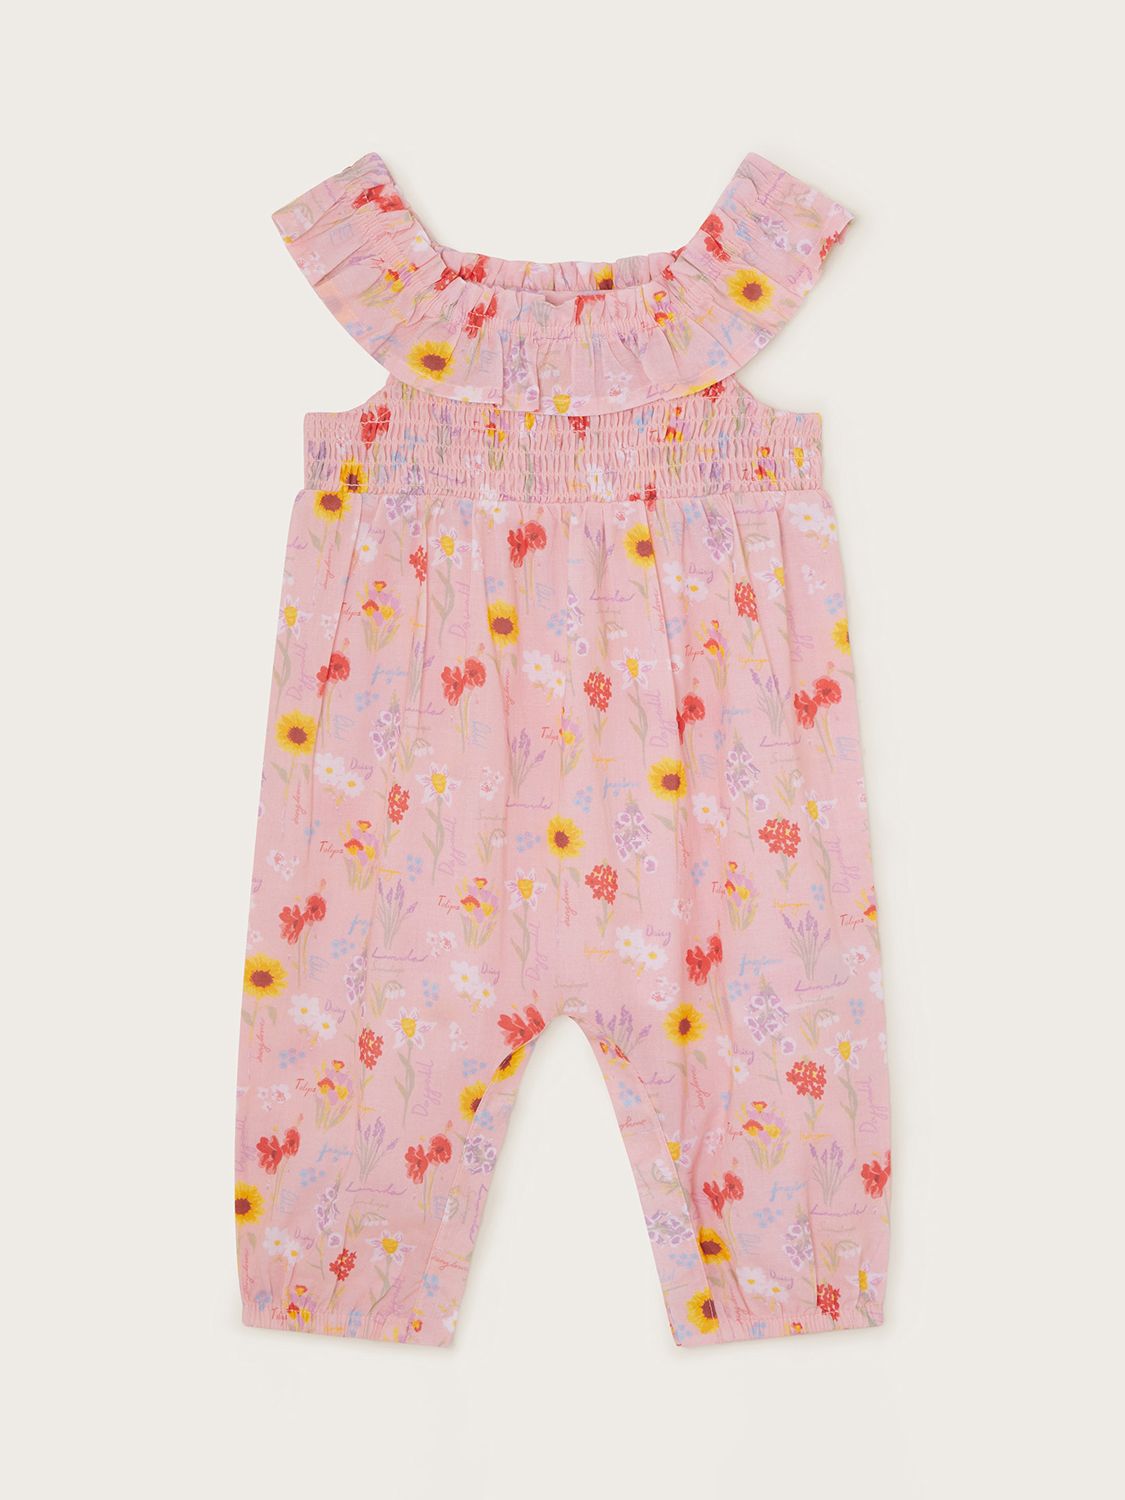 Monsoon Baby Sunflower Print Frill Neck Romper, Pale Pink, 0-3 months